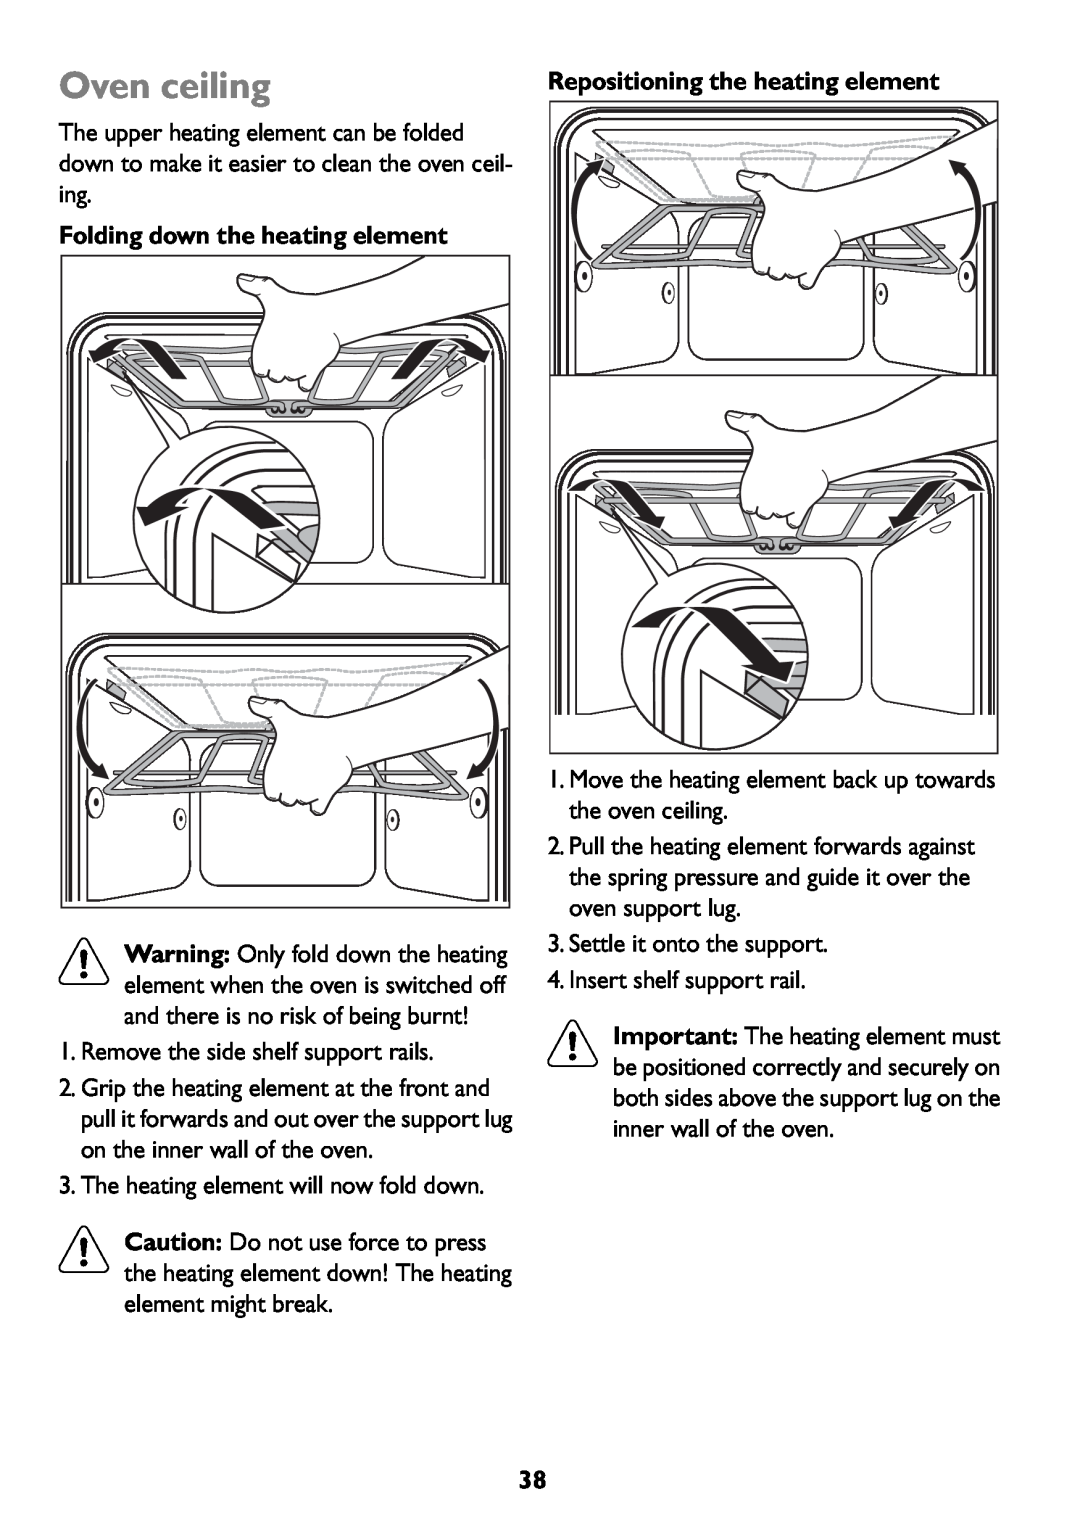 John Lewis JLBIOS607 manual Oven ceiling, Repositioning the heating element, Folding down the heating element 